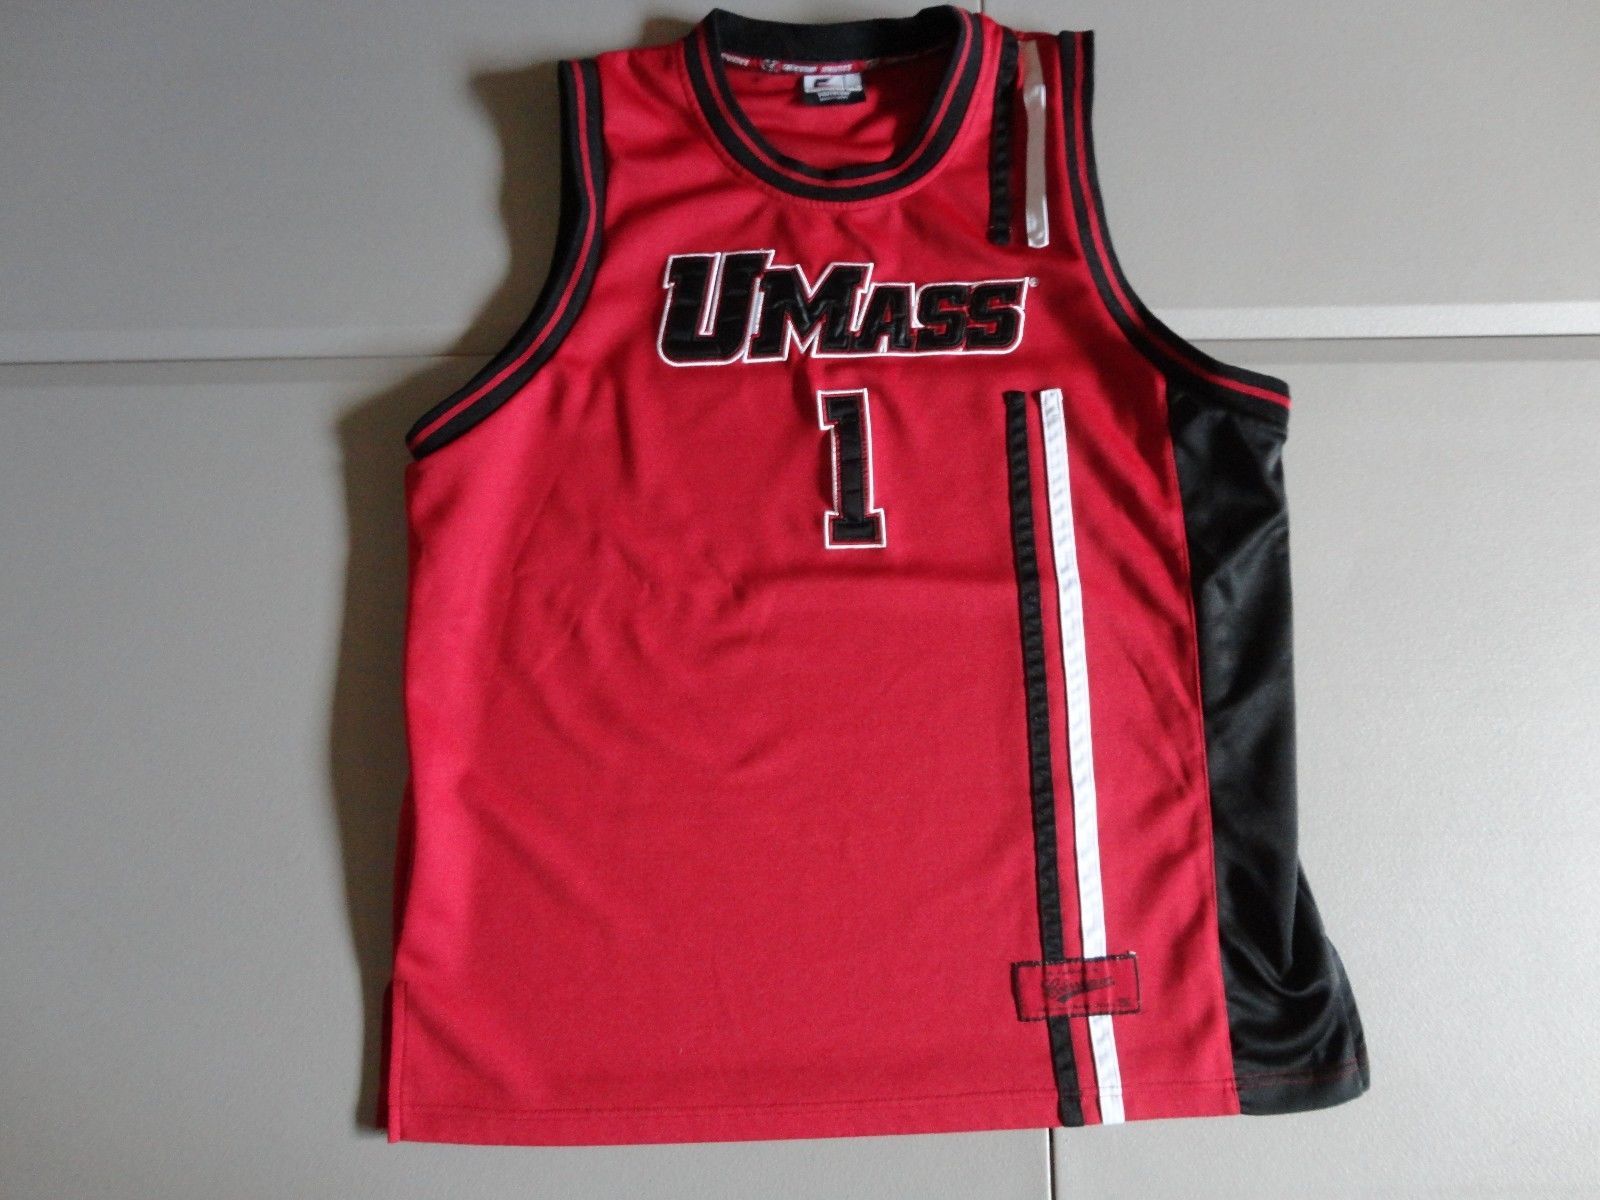 Primary image for Colosseum #1 UMASS Minutemen NCAA Basketball Jersey Youth XL (20)  Free US NICE